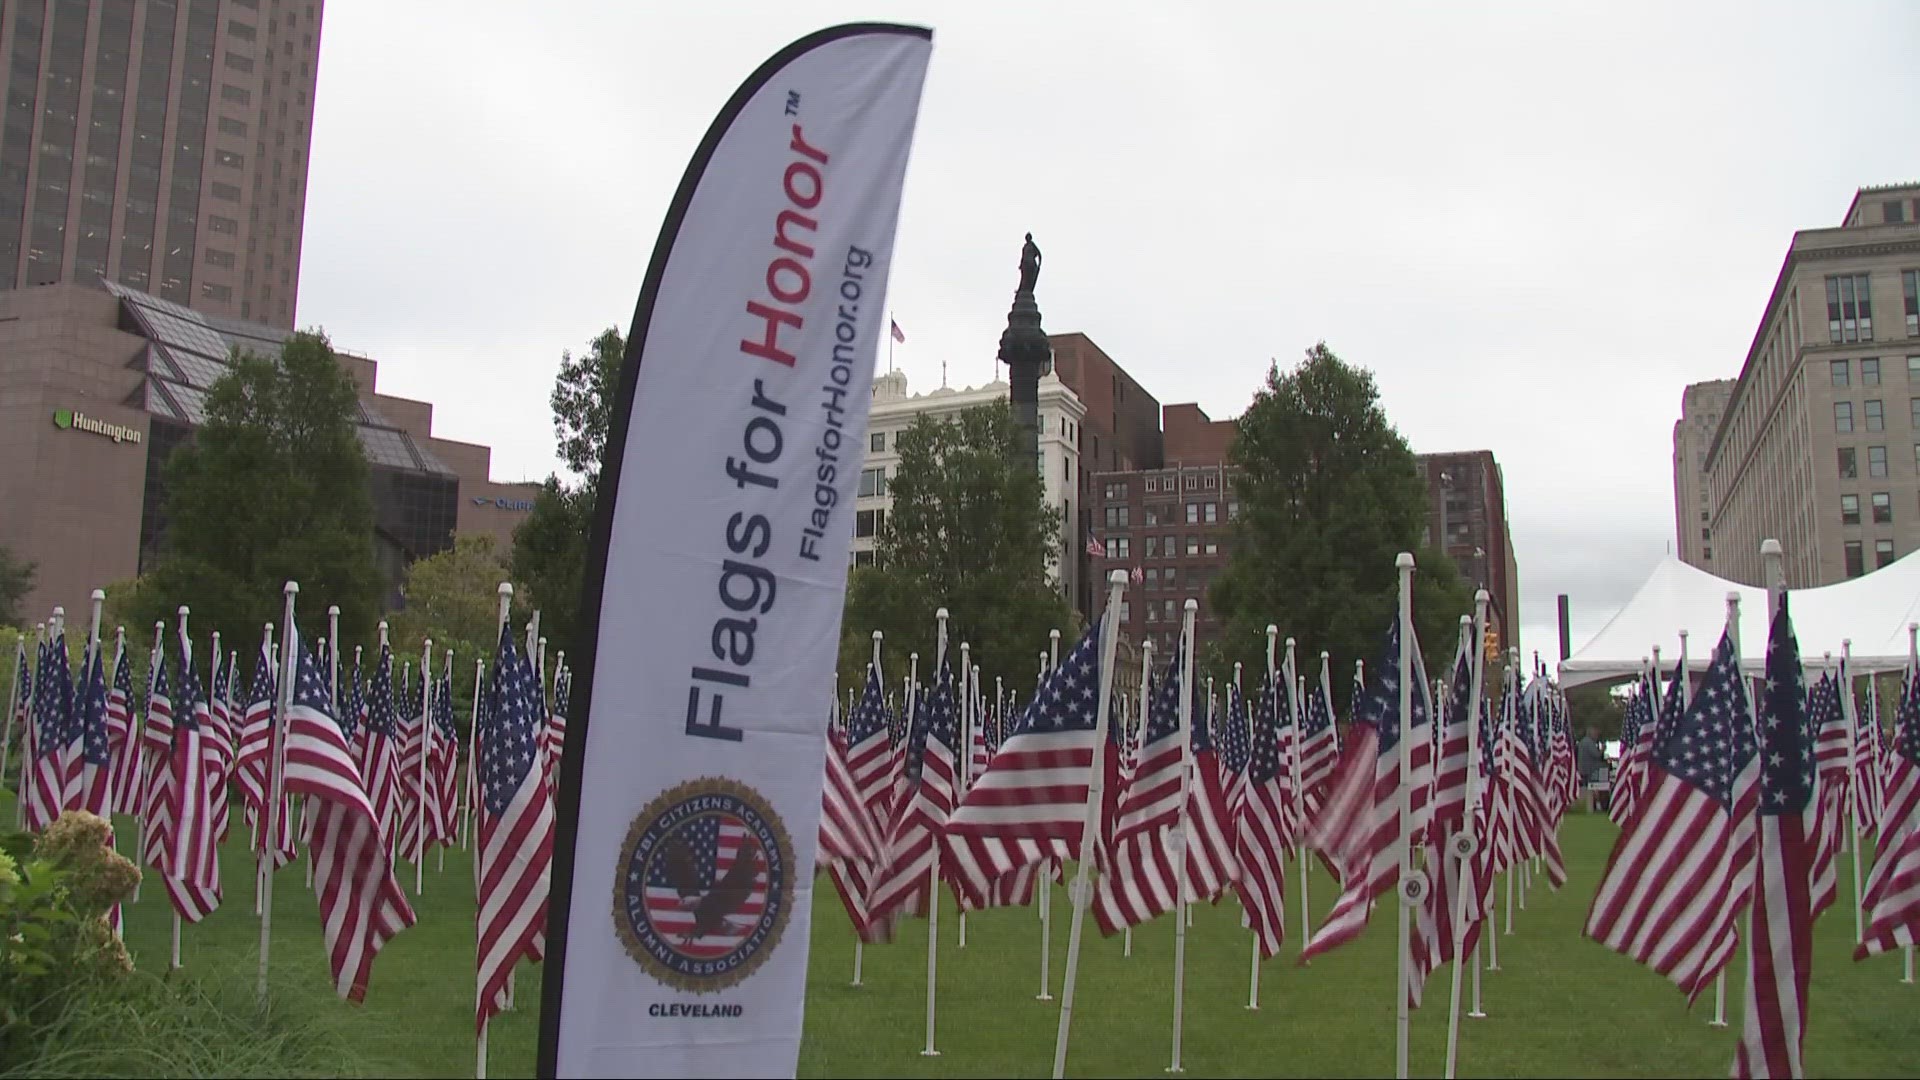 The 600 American flags honor fallen military, police, firefighters, teachers, and medical professionals, among others.